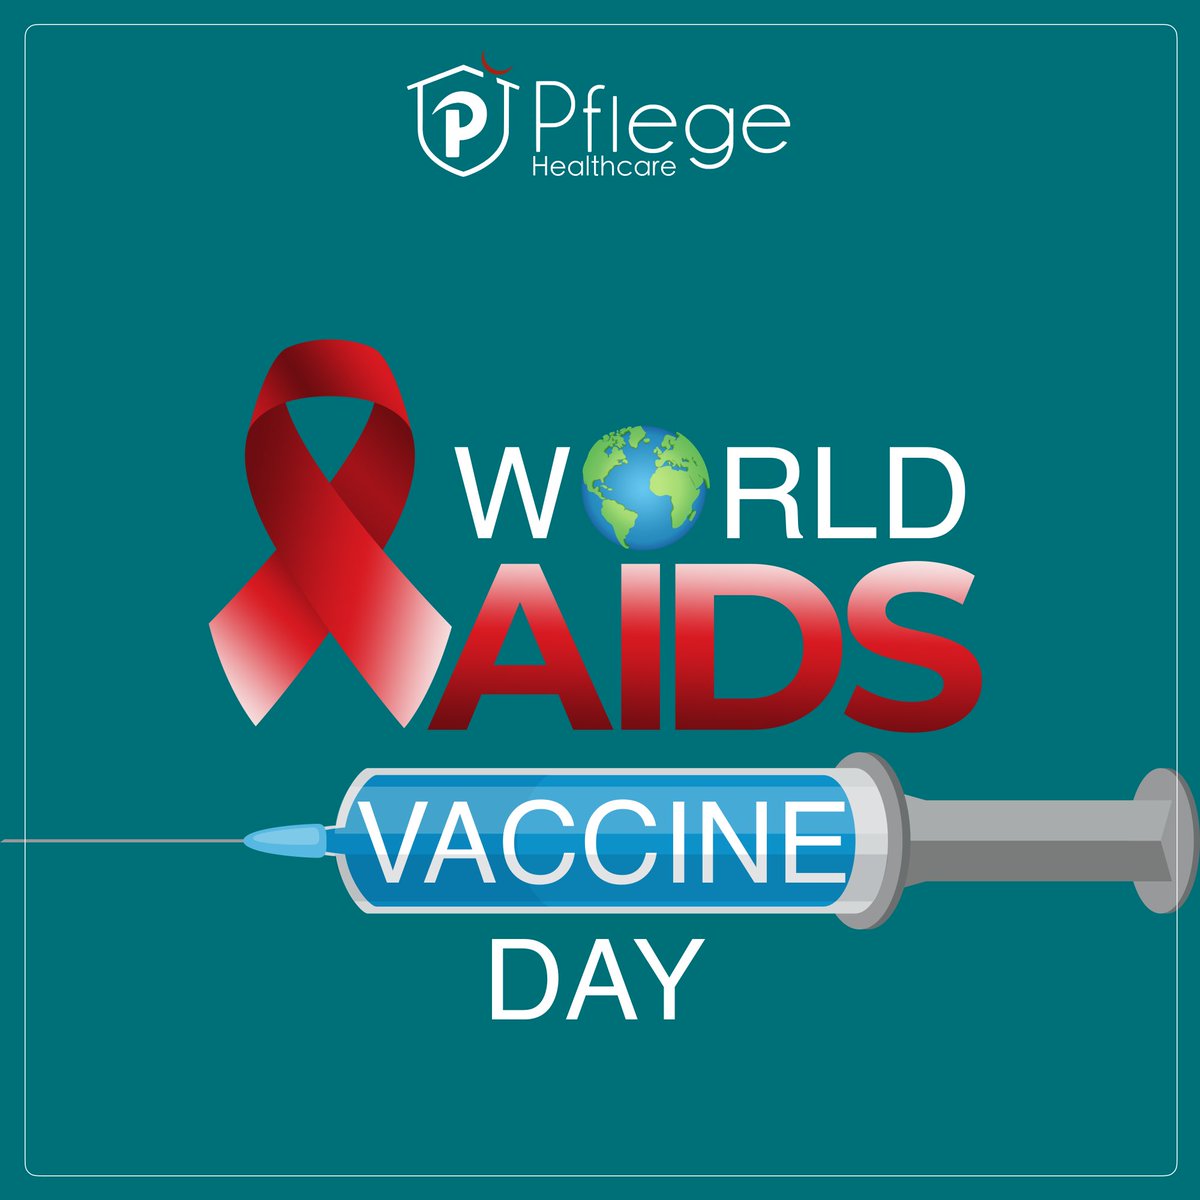 🌍 Today is World AIDS Vaccine Day! 🌍
.
Together, we can make a difference and work towards a world free of HIV/AIDS. 💪💉 
.
#WorldAIDSVaccineDay #EndHIVAIDS #SupportResearch #HealthForAll #pflege #pflegehealthcare 
.